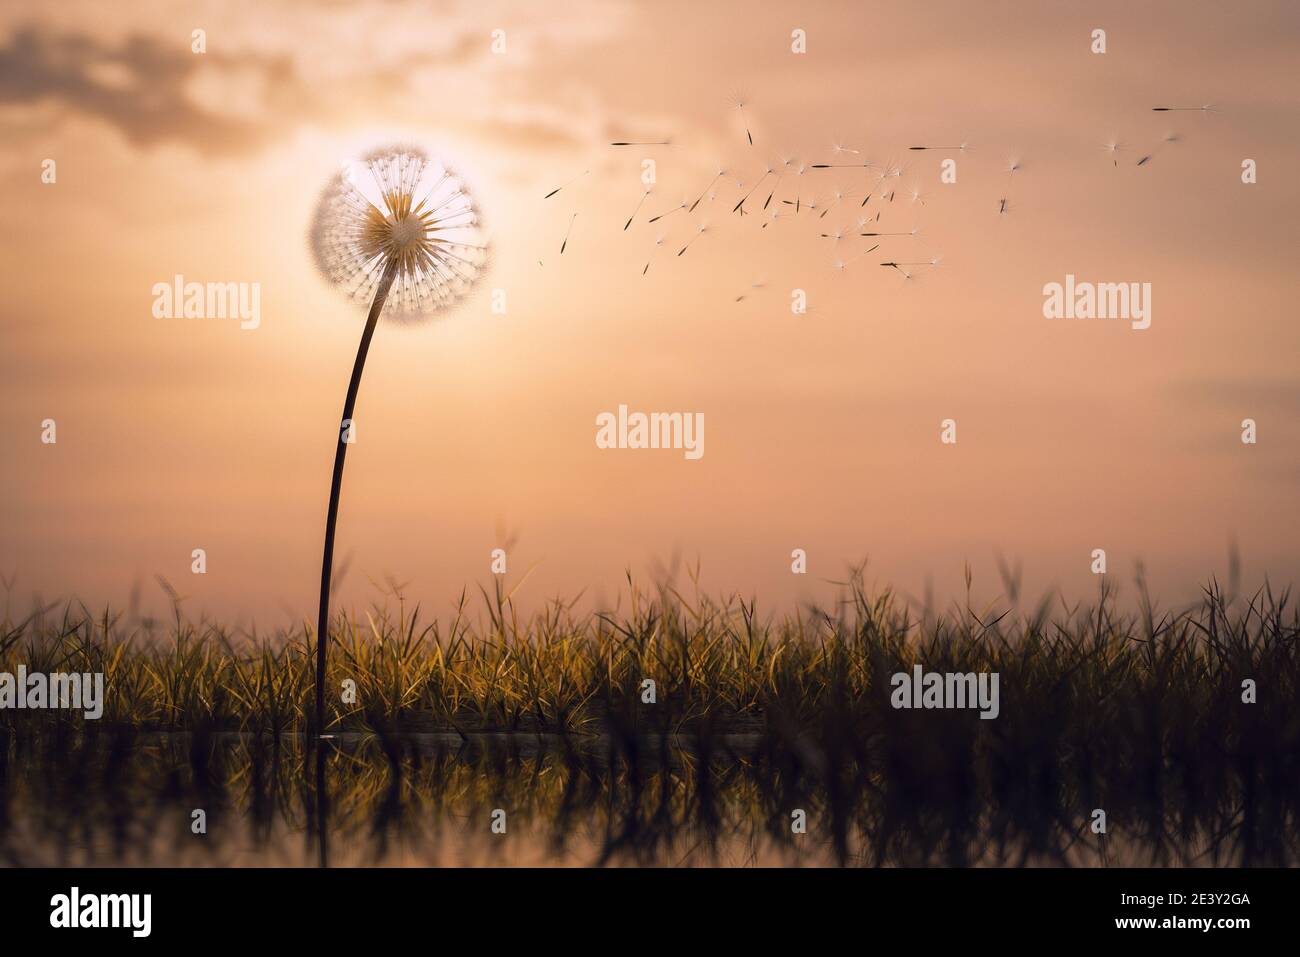 Dandelion clock seeds floating in the air, time or nature concept Stock Photo